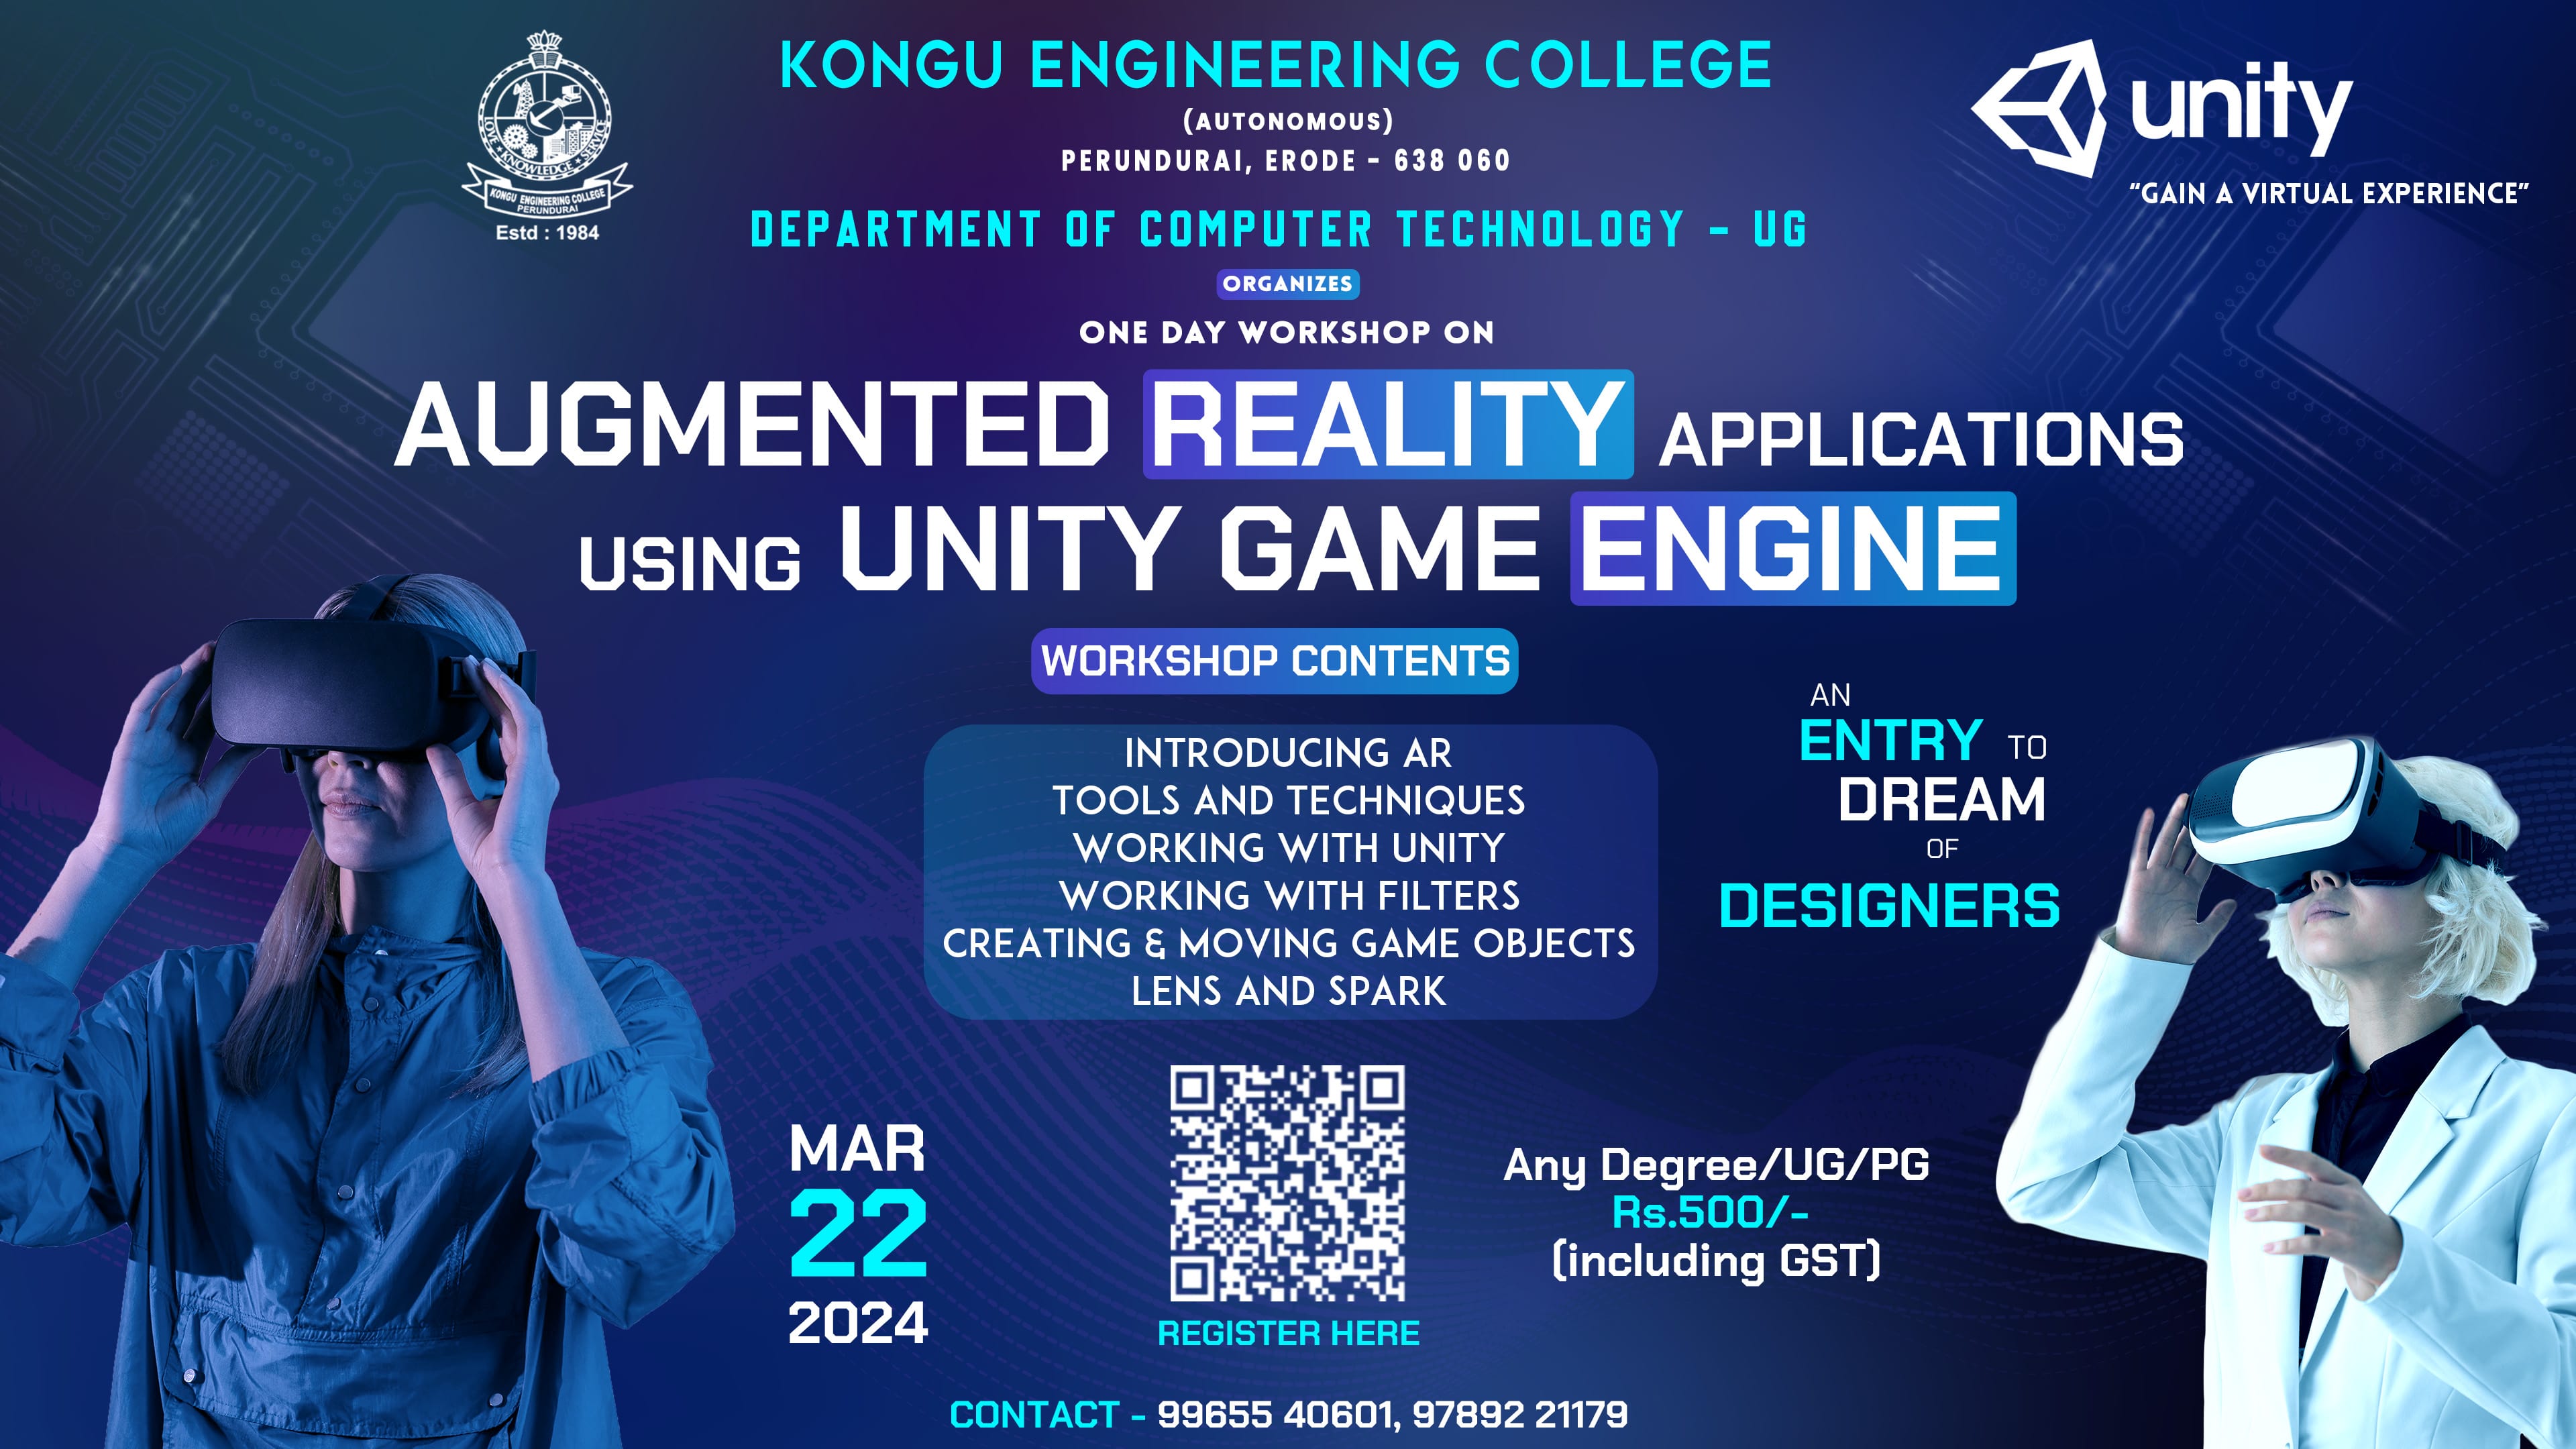 One day workshop on Augmented Reality applications using Unity Game Engine 2024